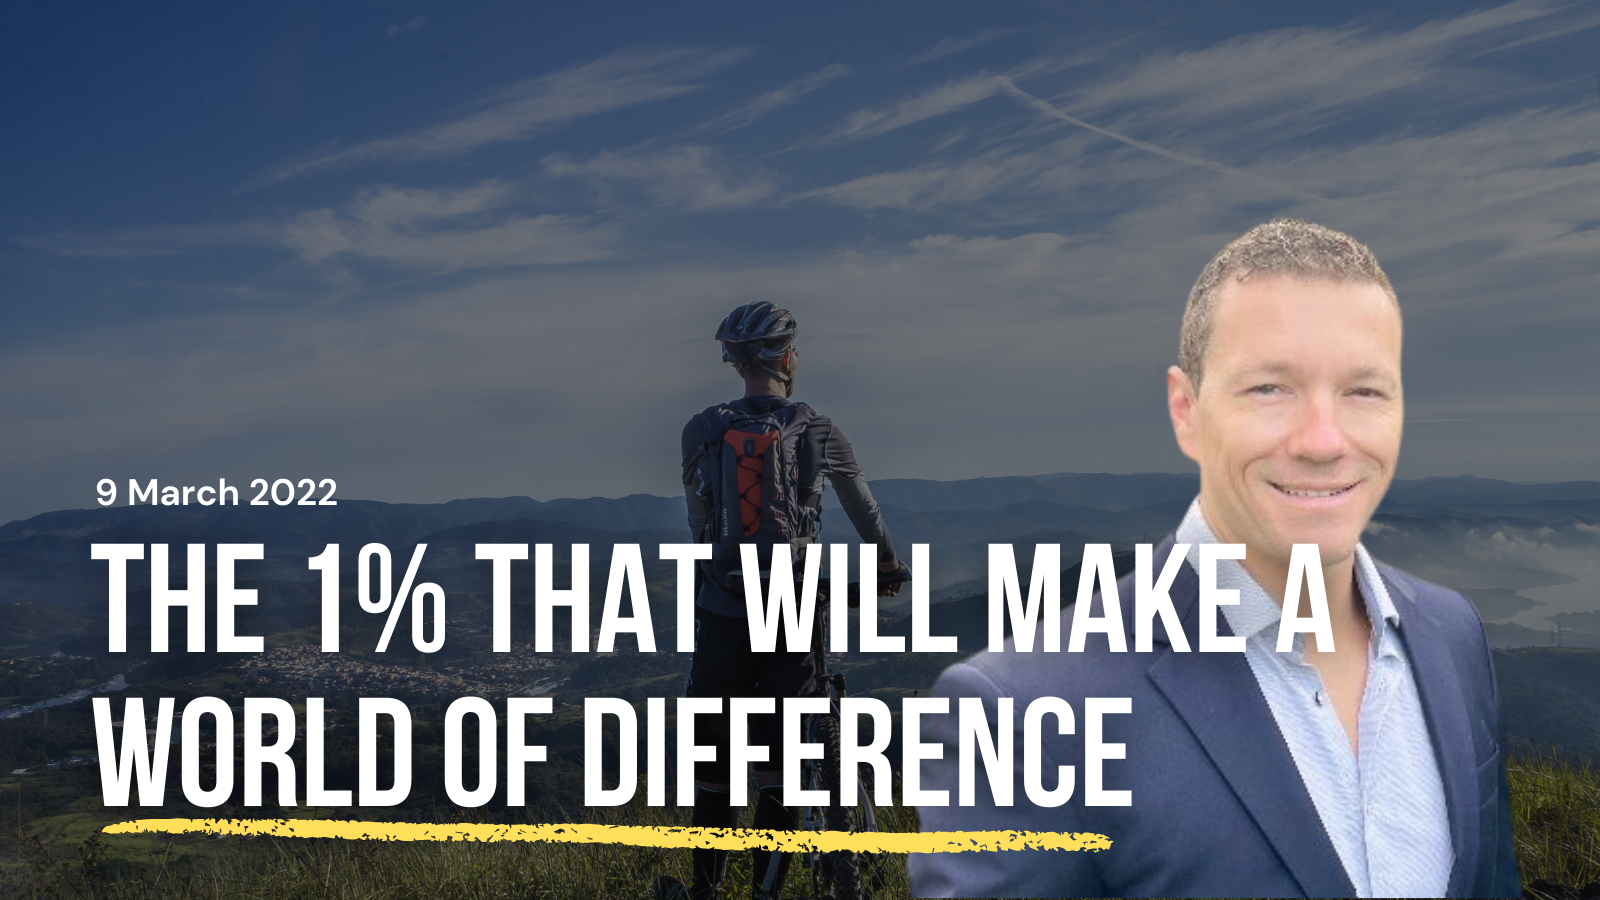 82. 1 percent that will make a world of difference